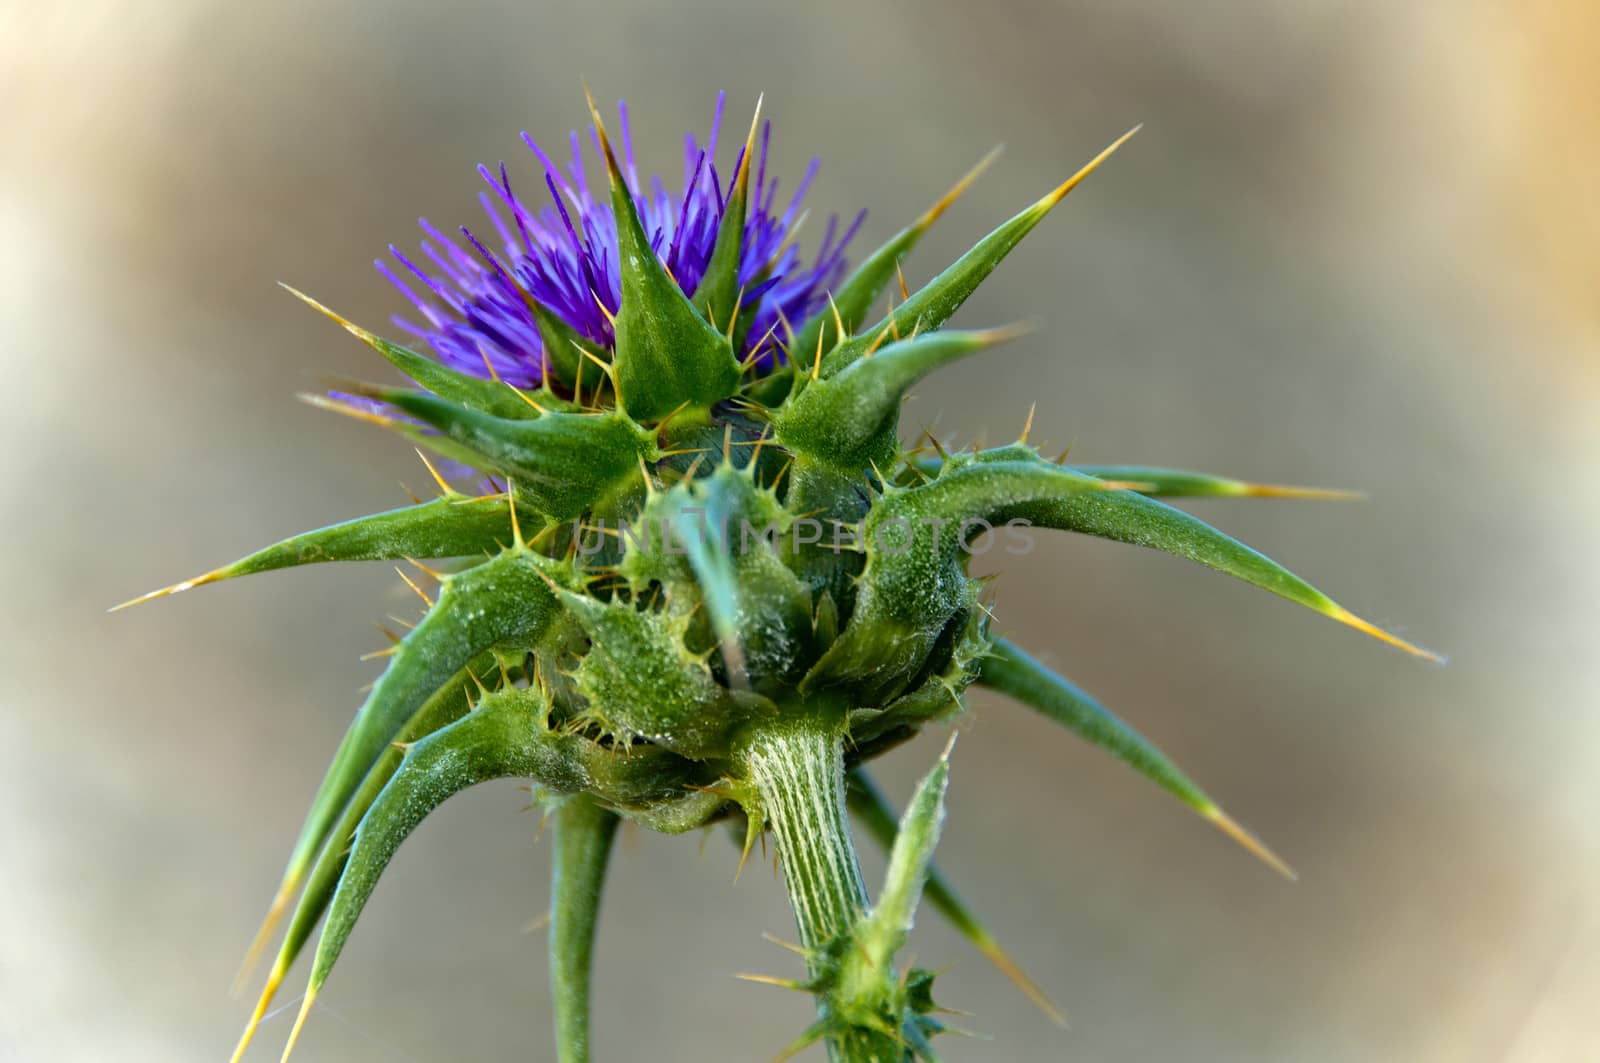 Thistle flower by sssanchez